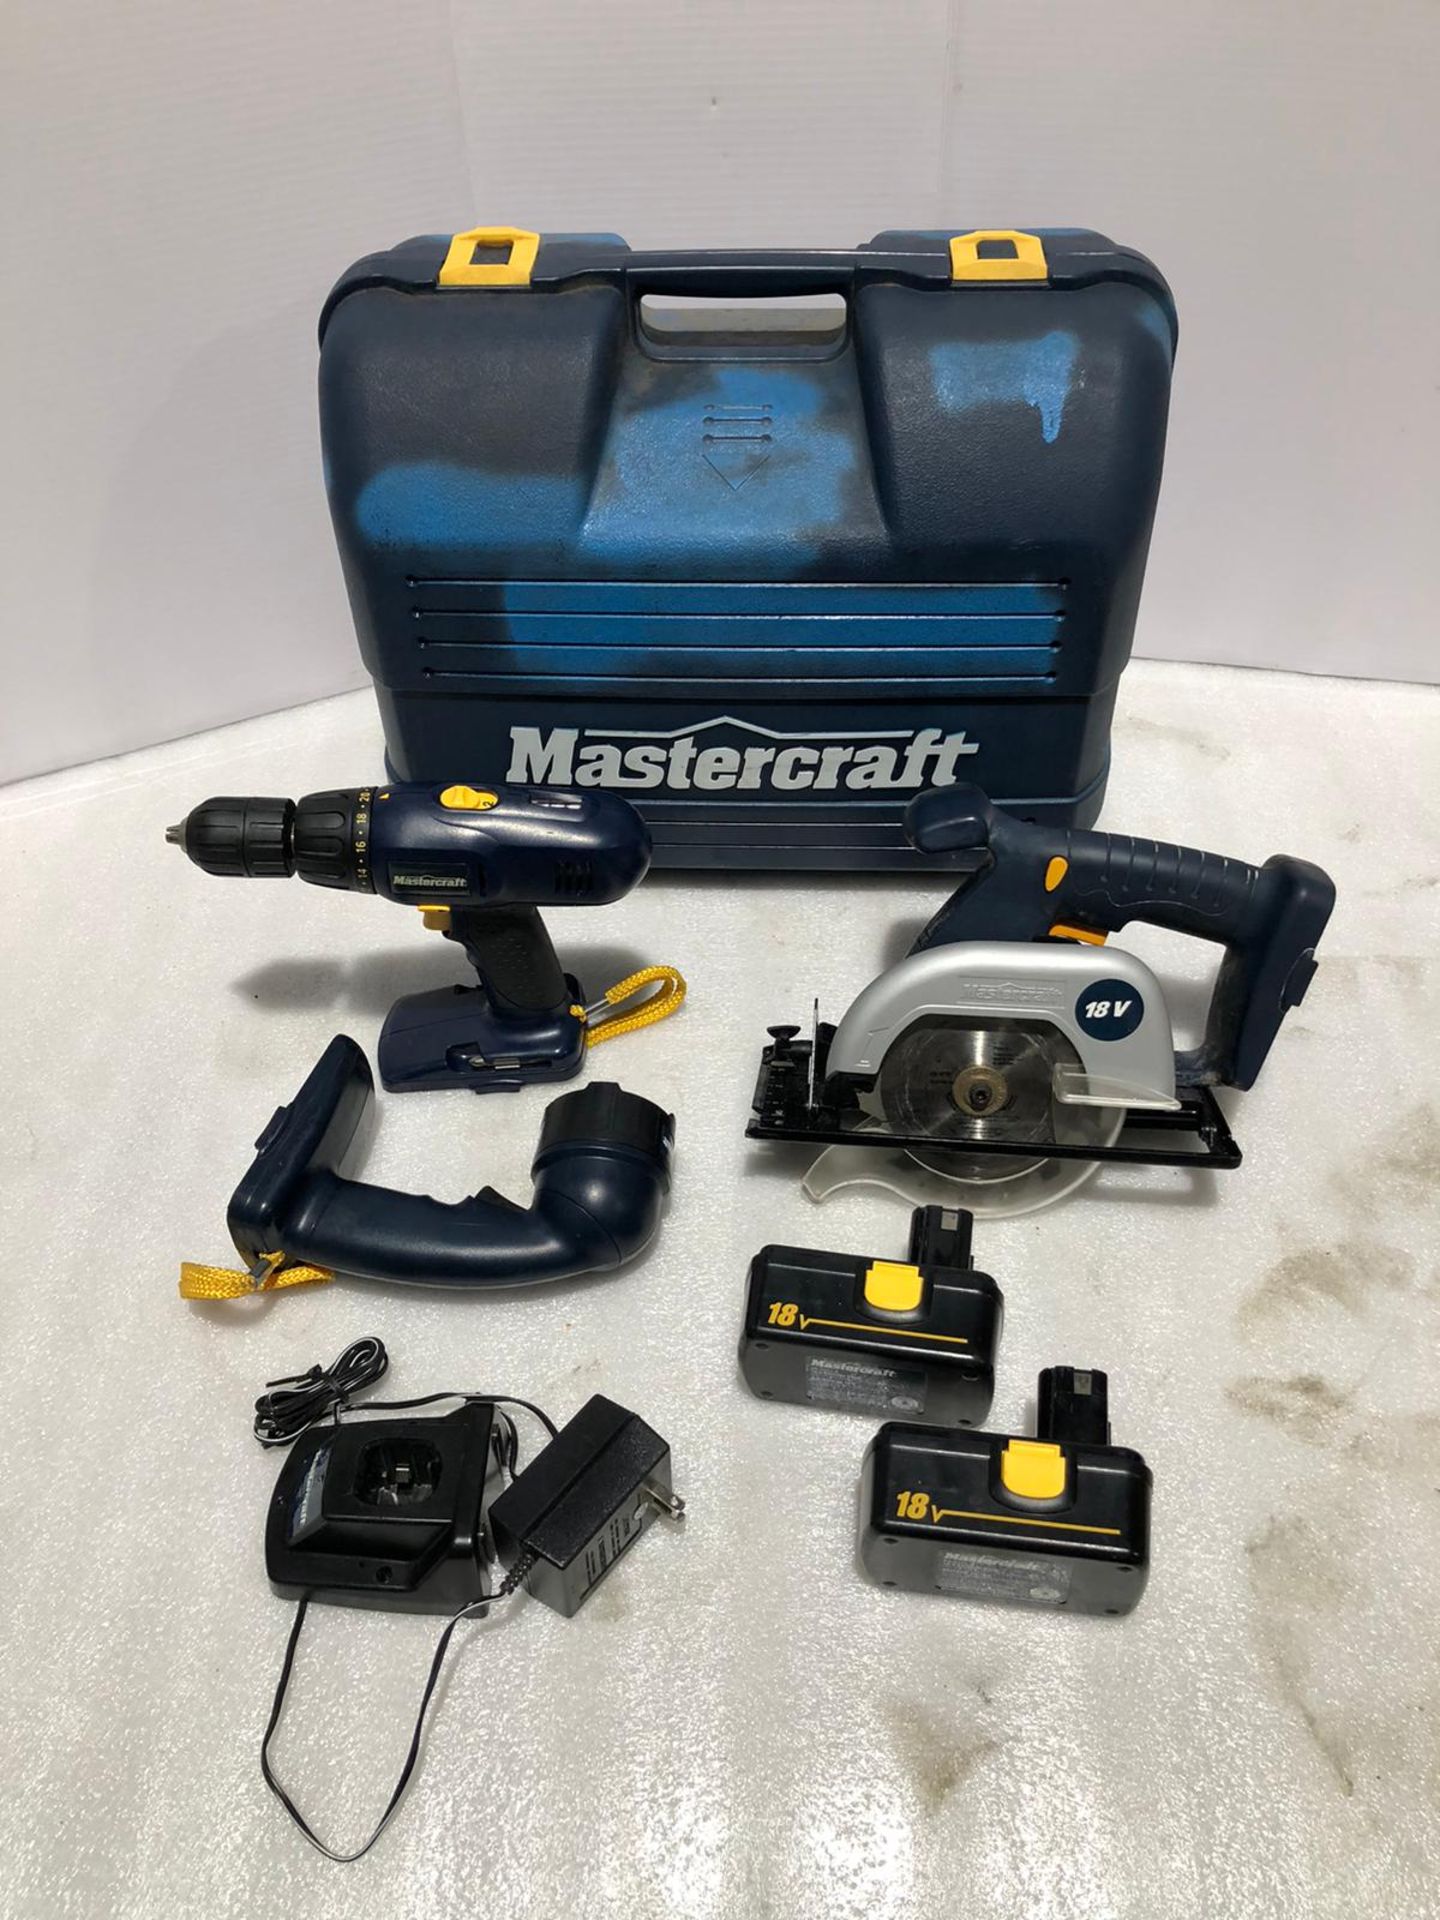 Lot of 4 (4 units) Mastercraft Drill, Saws and Light - Battery Powered and Electric Circular saw -